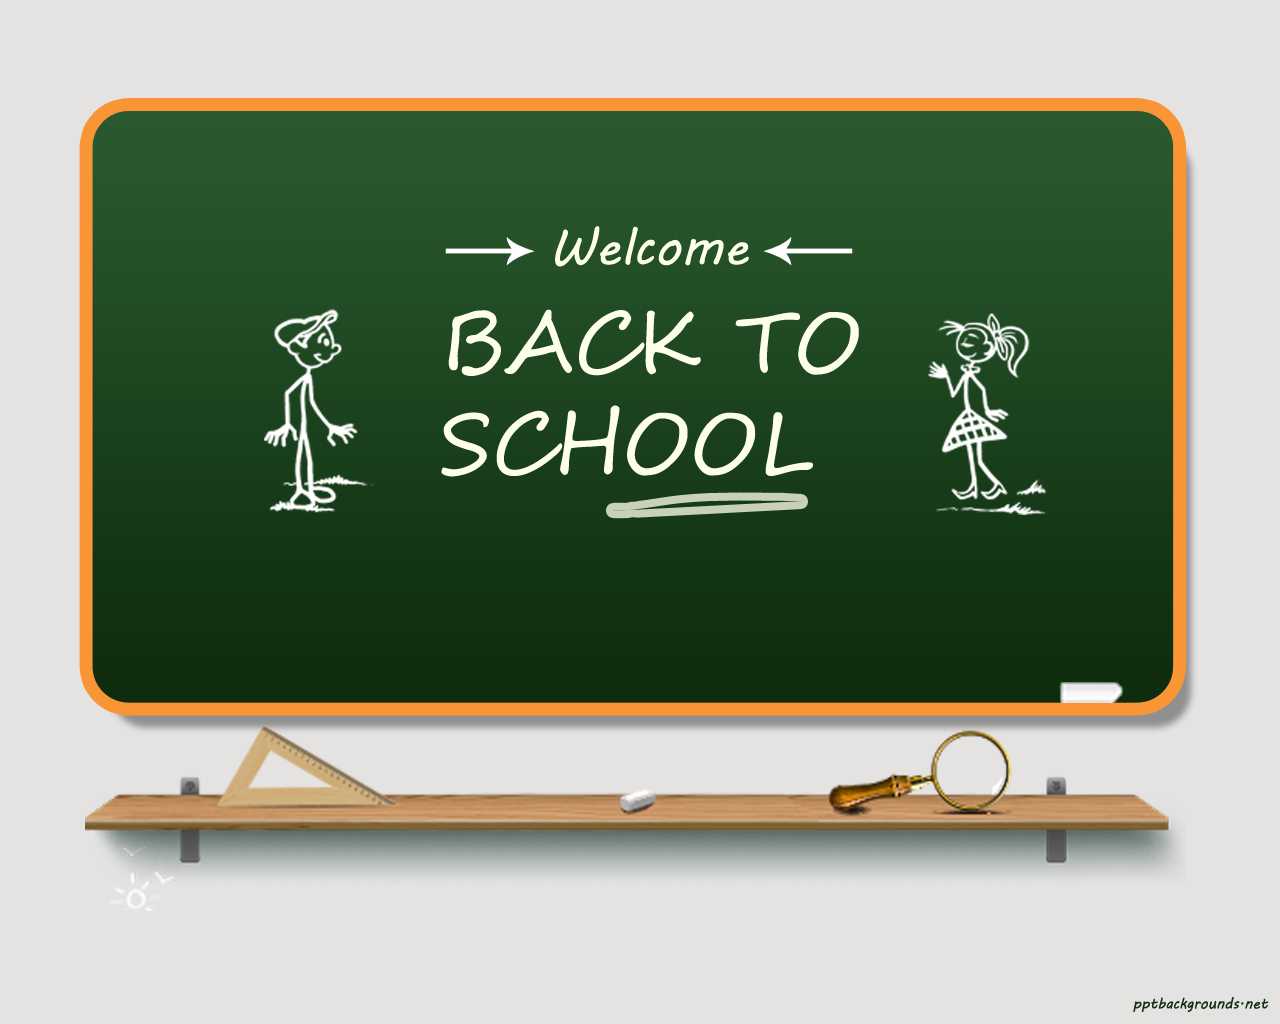 Back To School 2014 – 2015 Backgrounds For Powerpoint With Regard To Back To School Powerpoint Template